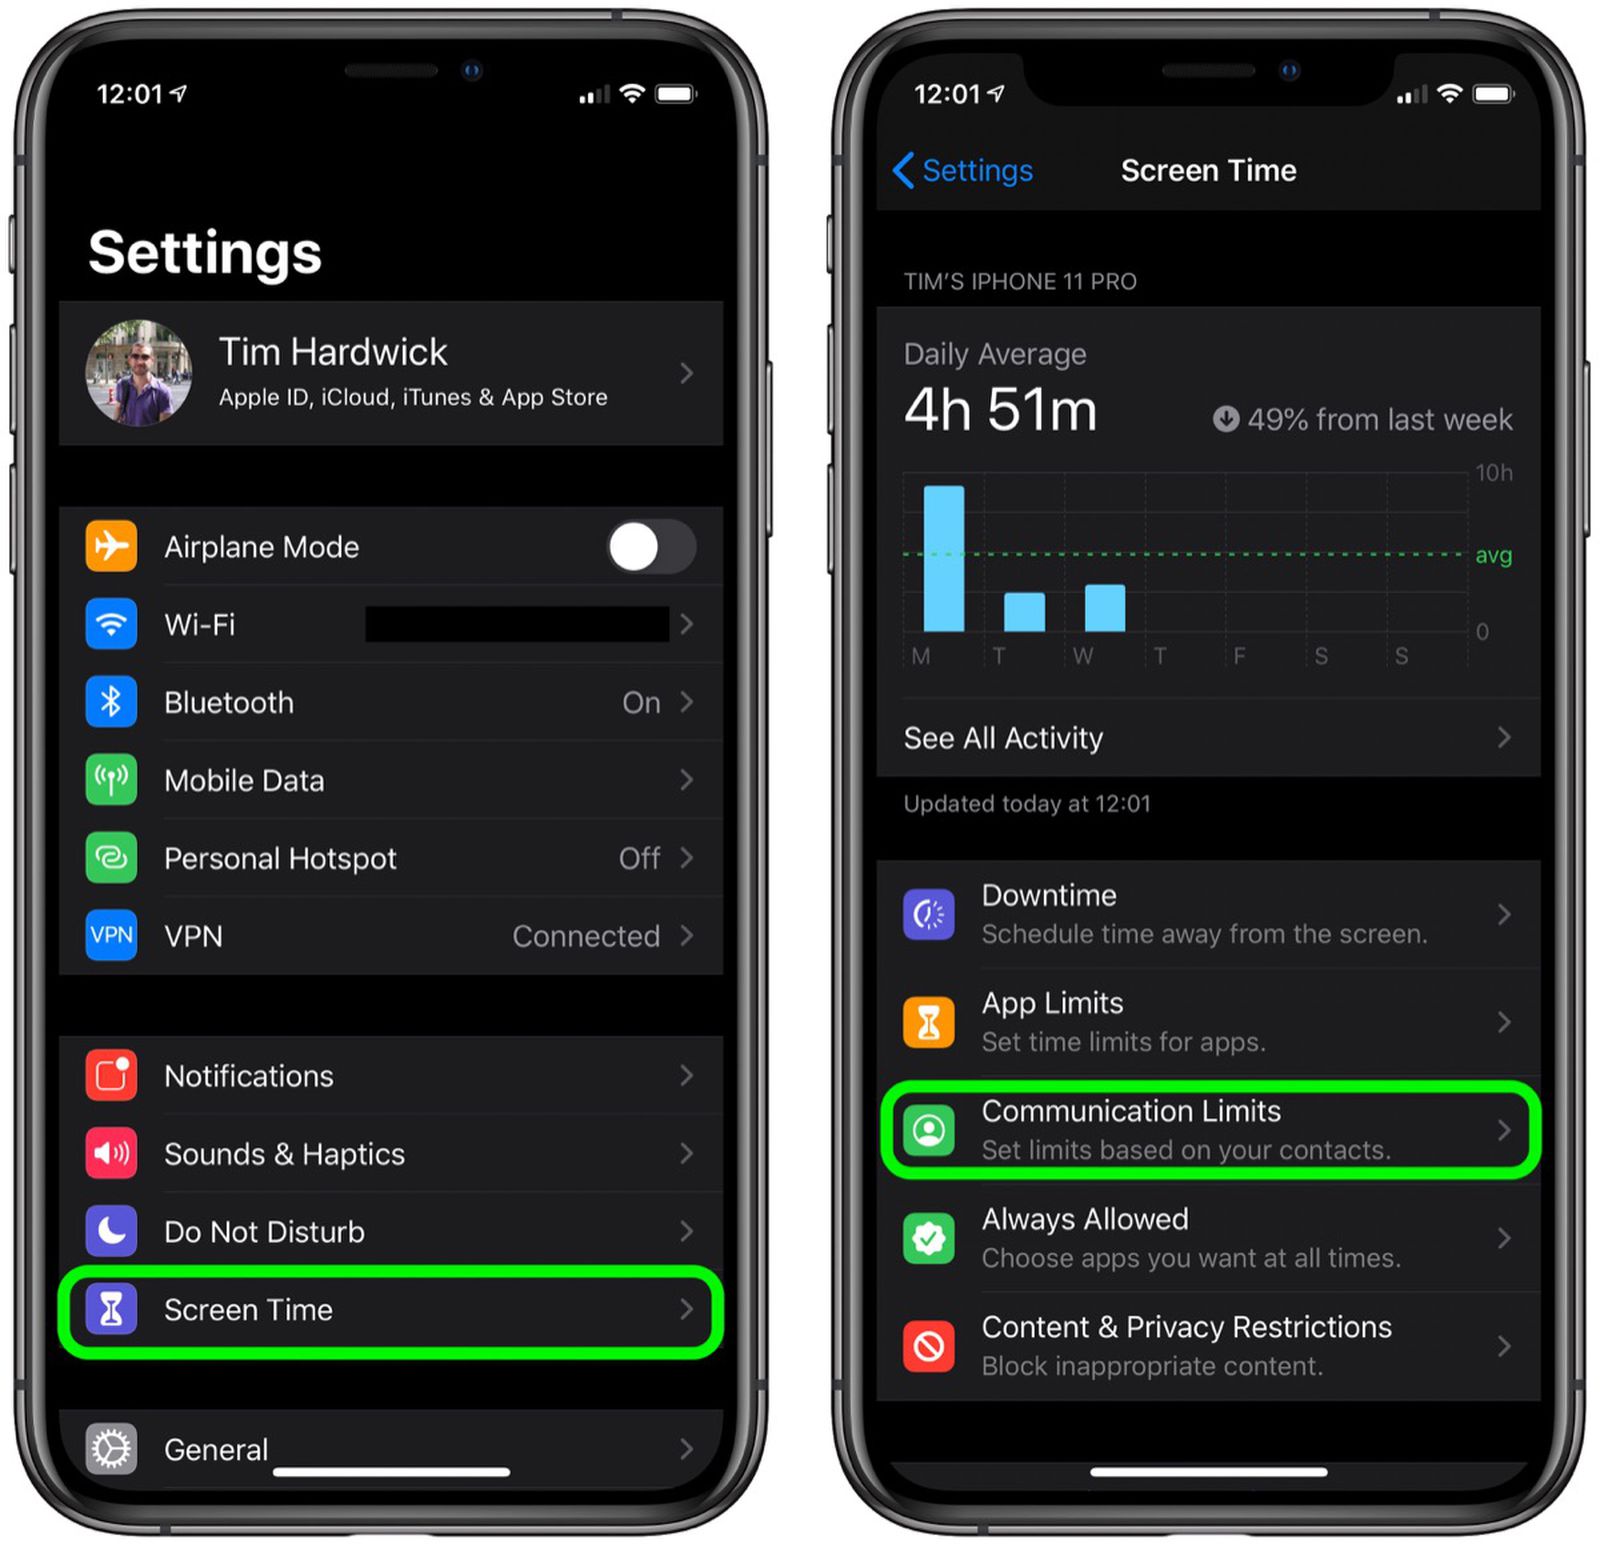 Extended Screen Time: Making The Screen Stay On Longer On IPhone 12